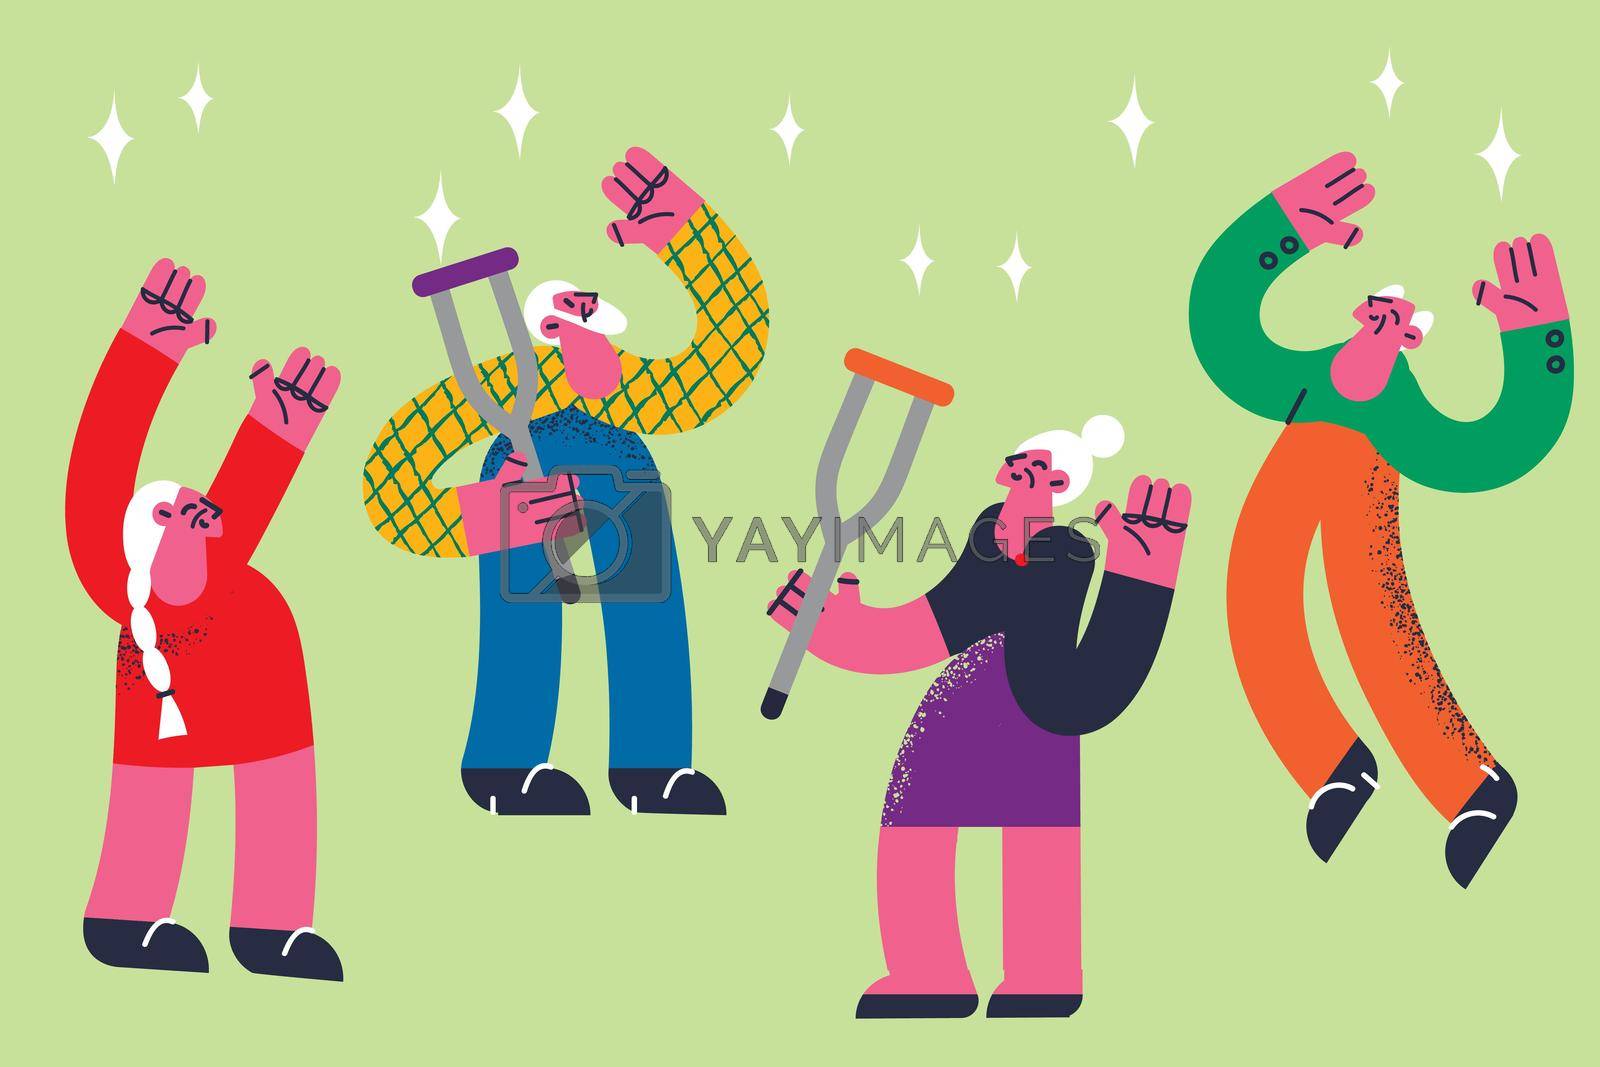 Happy active lifestyle of elderly concept. Group of mature old disabled people standing with crutches feeling happy jumping together vector illustration